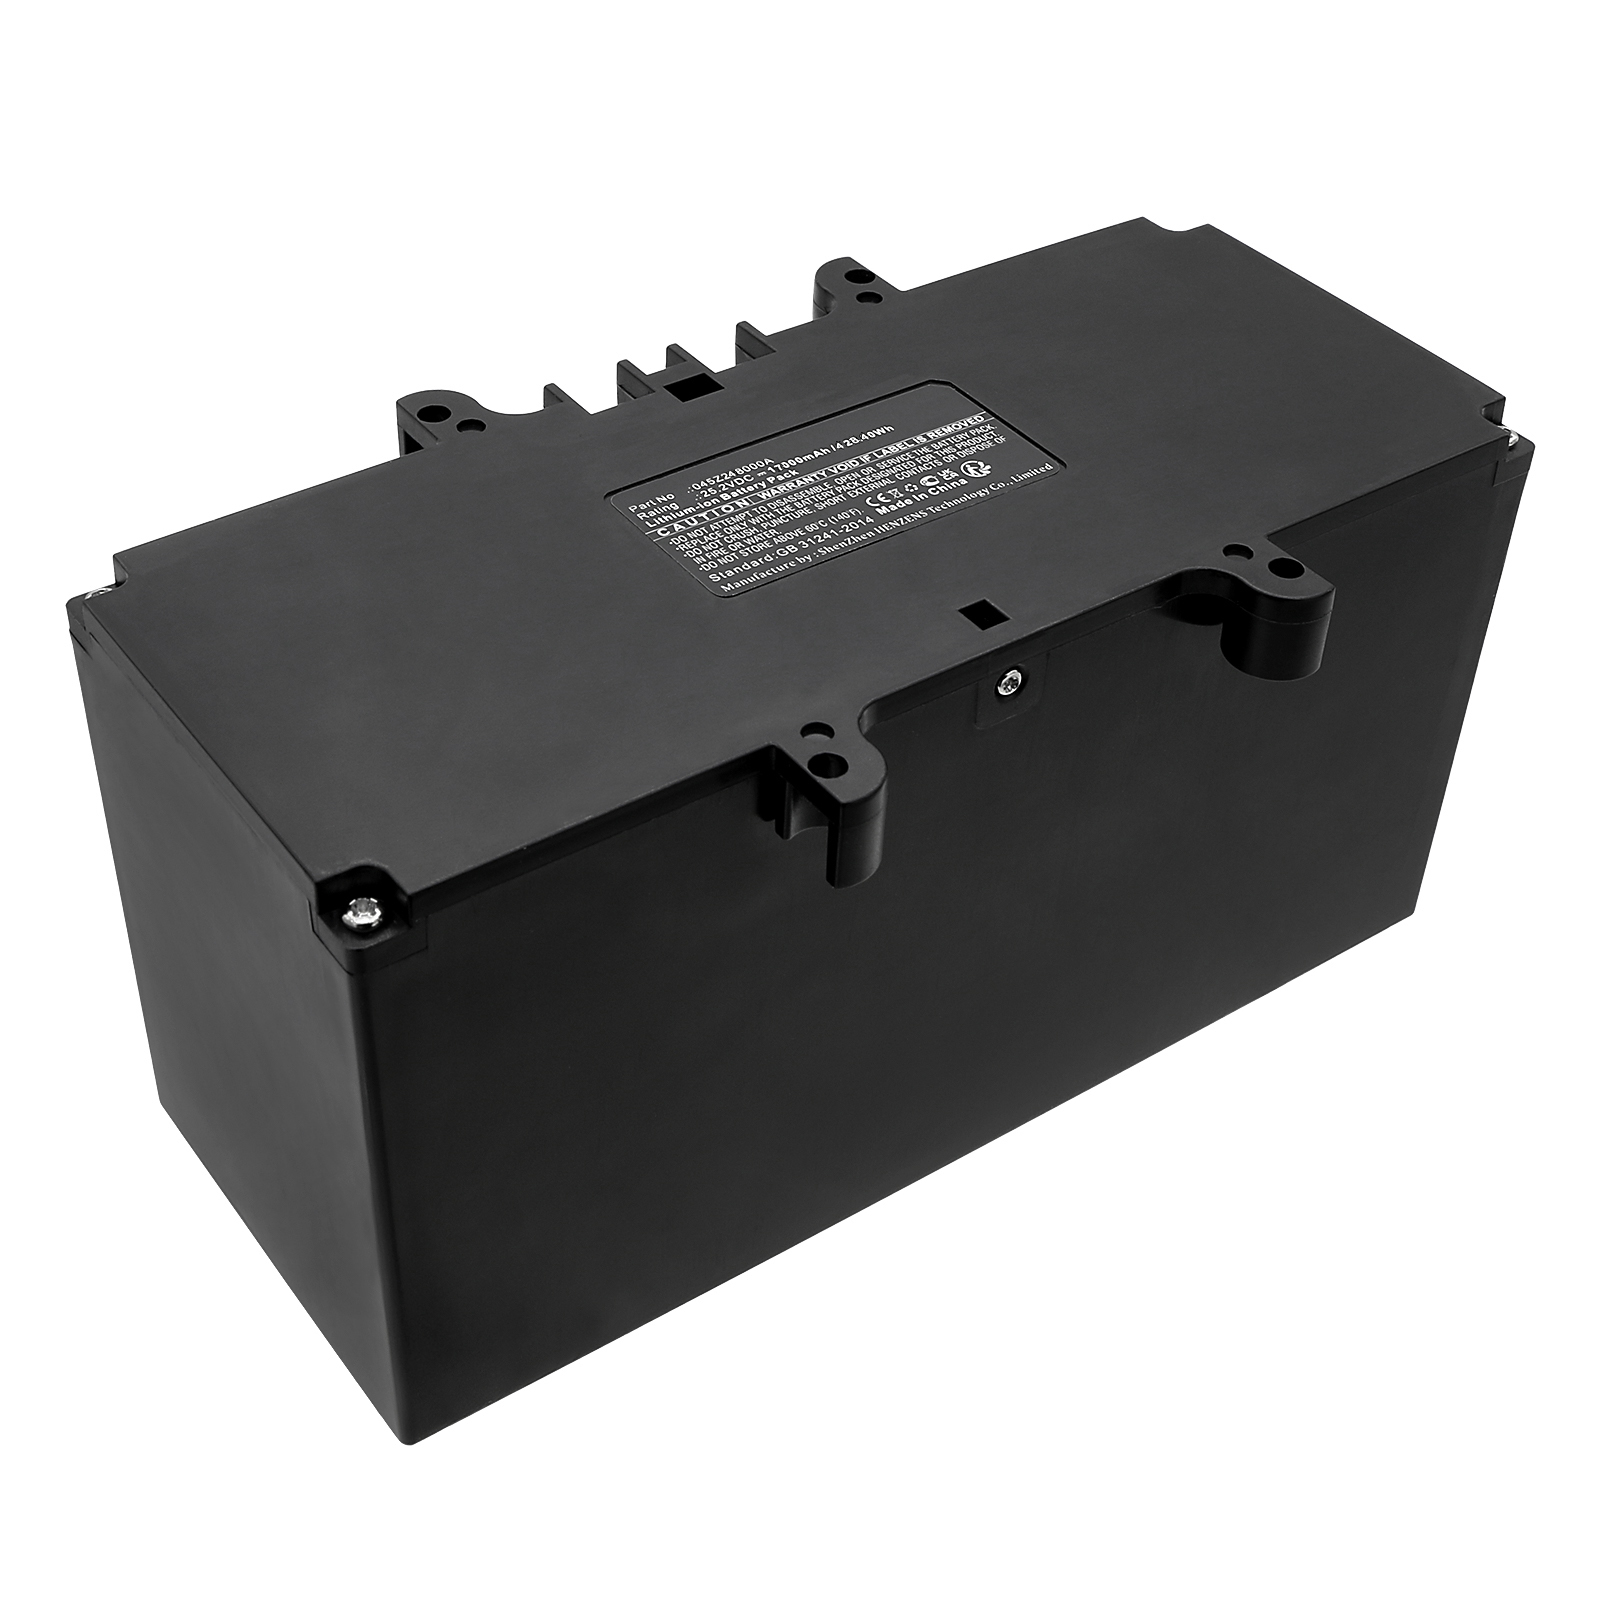 Synergy Digital Lawn Mower Battery, Compatible with Ambrogio 045Z298000A Lawn Mower Battery (Li-ion, 25.2V, 17000mAh)